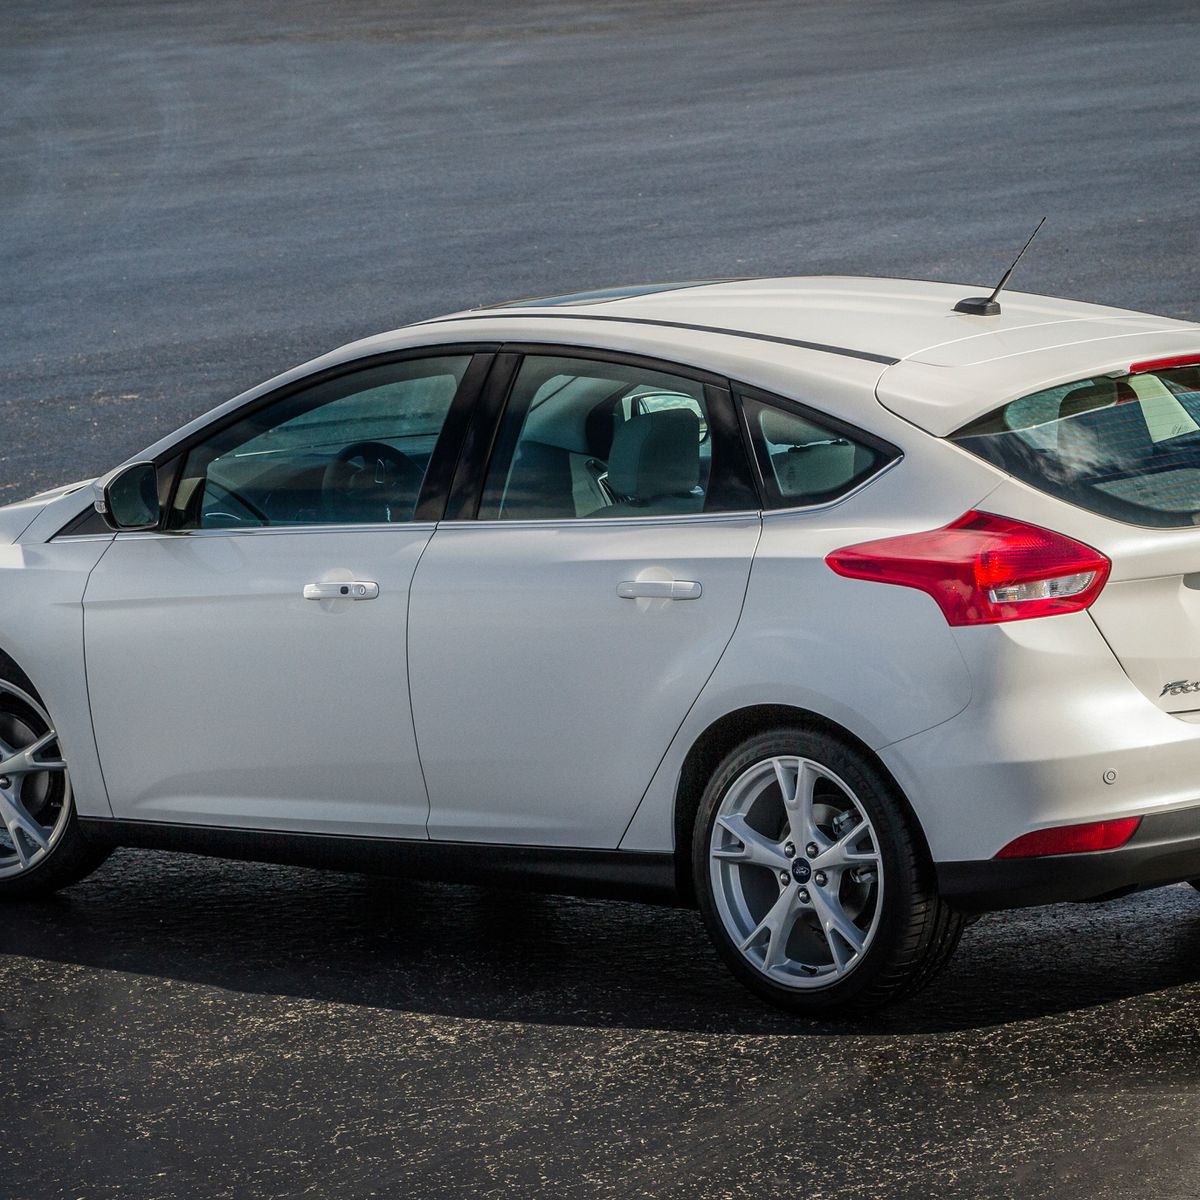 Full Pricing Details for the 2015 Ford Focus – News – Car and Driver